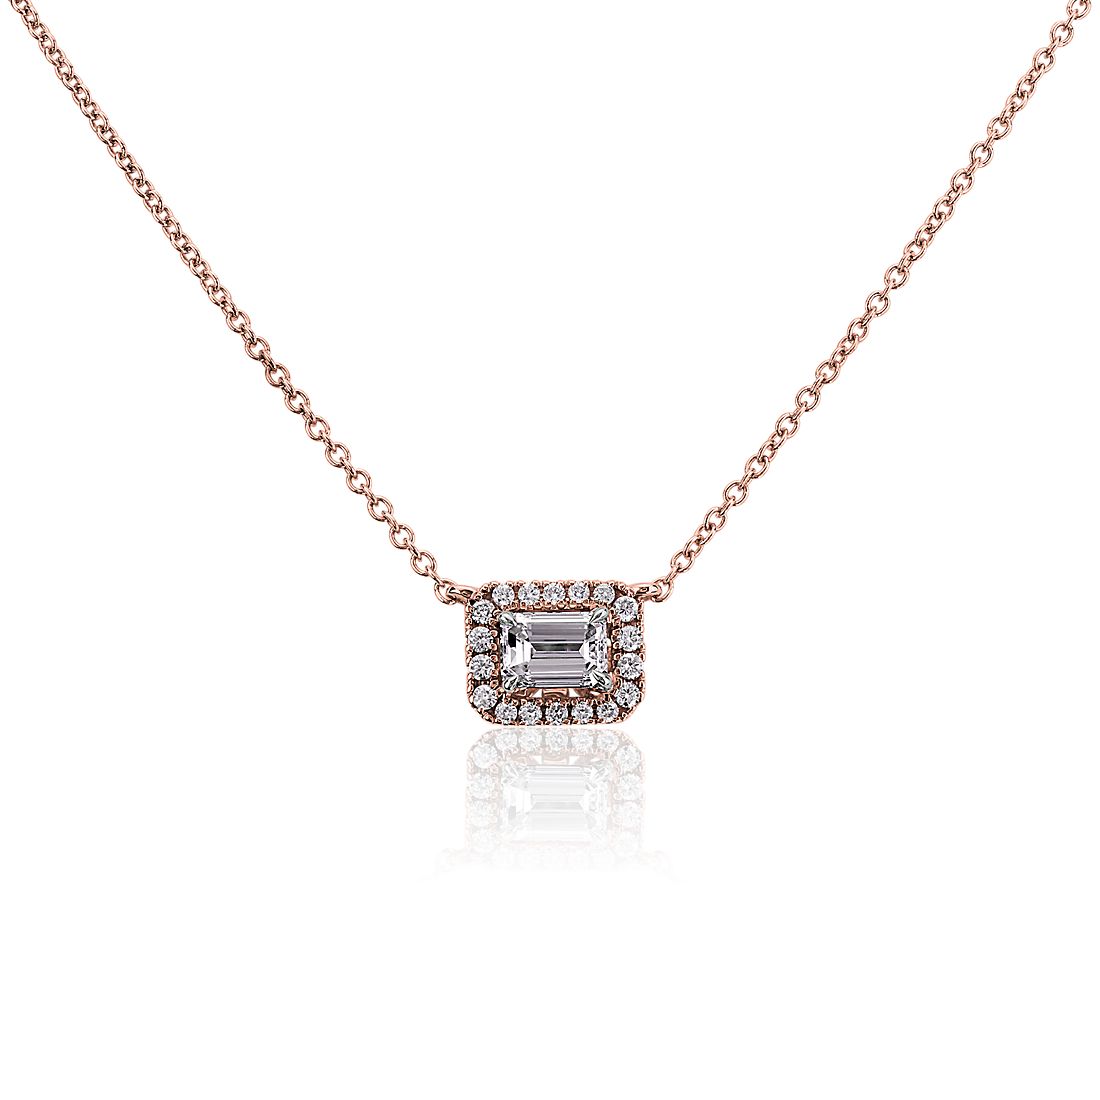 Emerald-Cut Diamond Halo Necklace in 14k Rose Gold (0.43 ct. tw.)